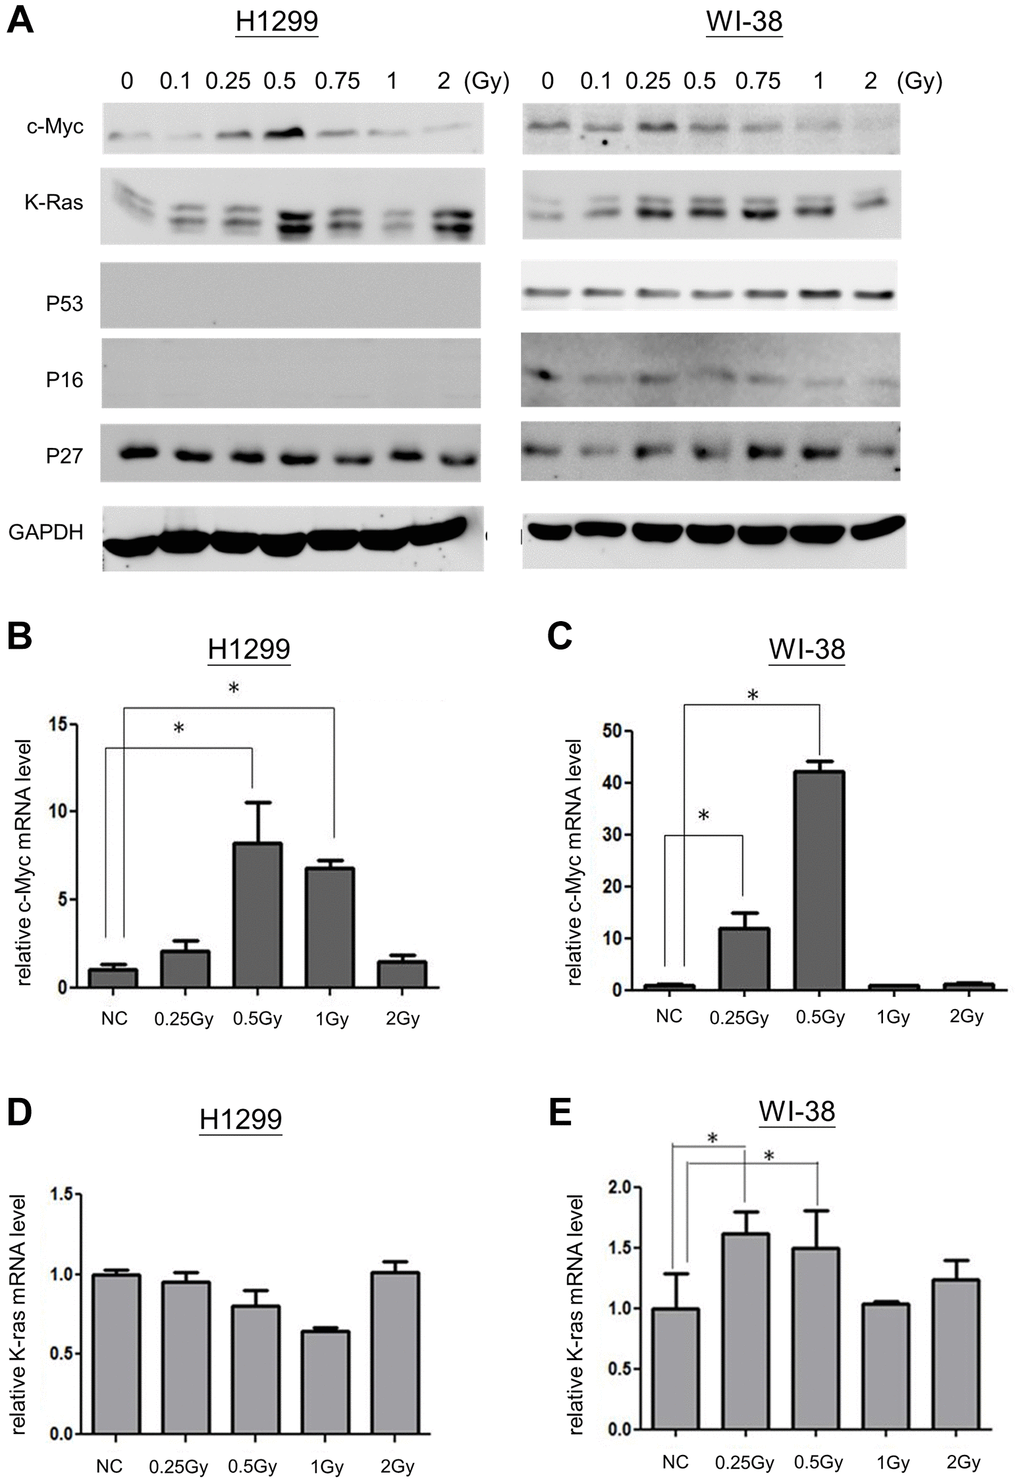 Expression of c-Myc and K-Ras in LDR induced senescence. (A) Western blot analysis for detecting the expression of c-Myc, K-Ras, p53, p16 and p27 in cells exposed to LDR. (B and C) qPCR was used for detection of c-Myc mRNA levels in H1299 cells and WI-38 cells after ionizing radiation, respectively. (D and E) The expression of K-Ras mRNA in H1299 cells and WI-38 cells exposed to ionizing radiation, respectively. *p 